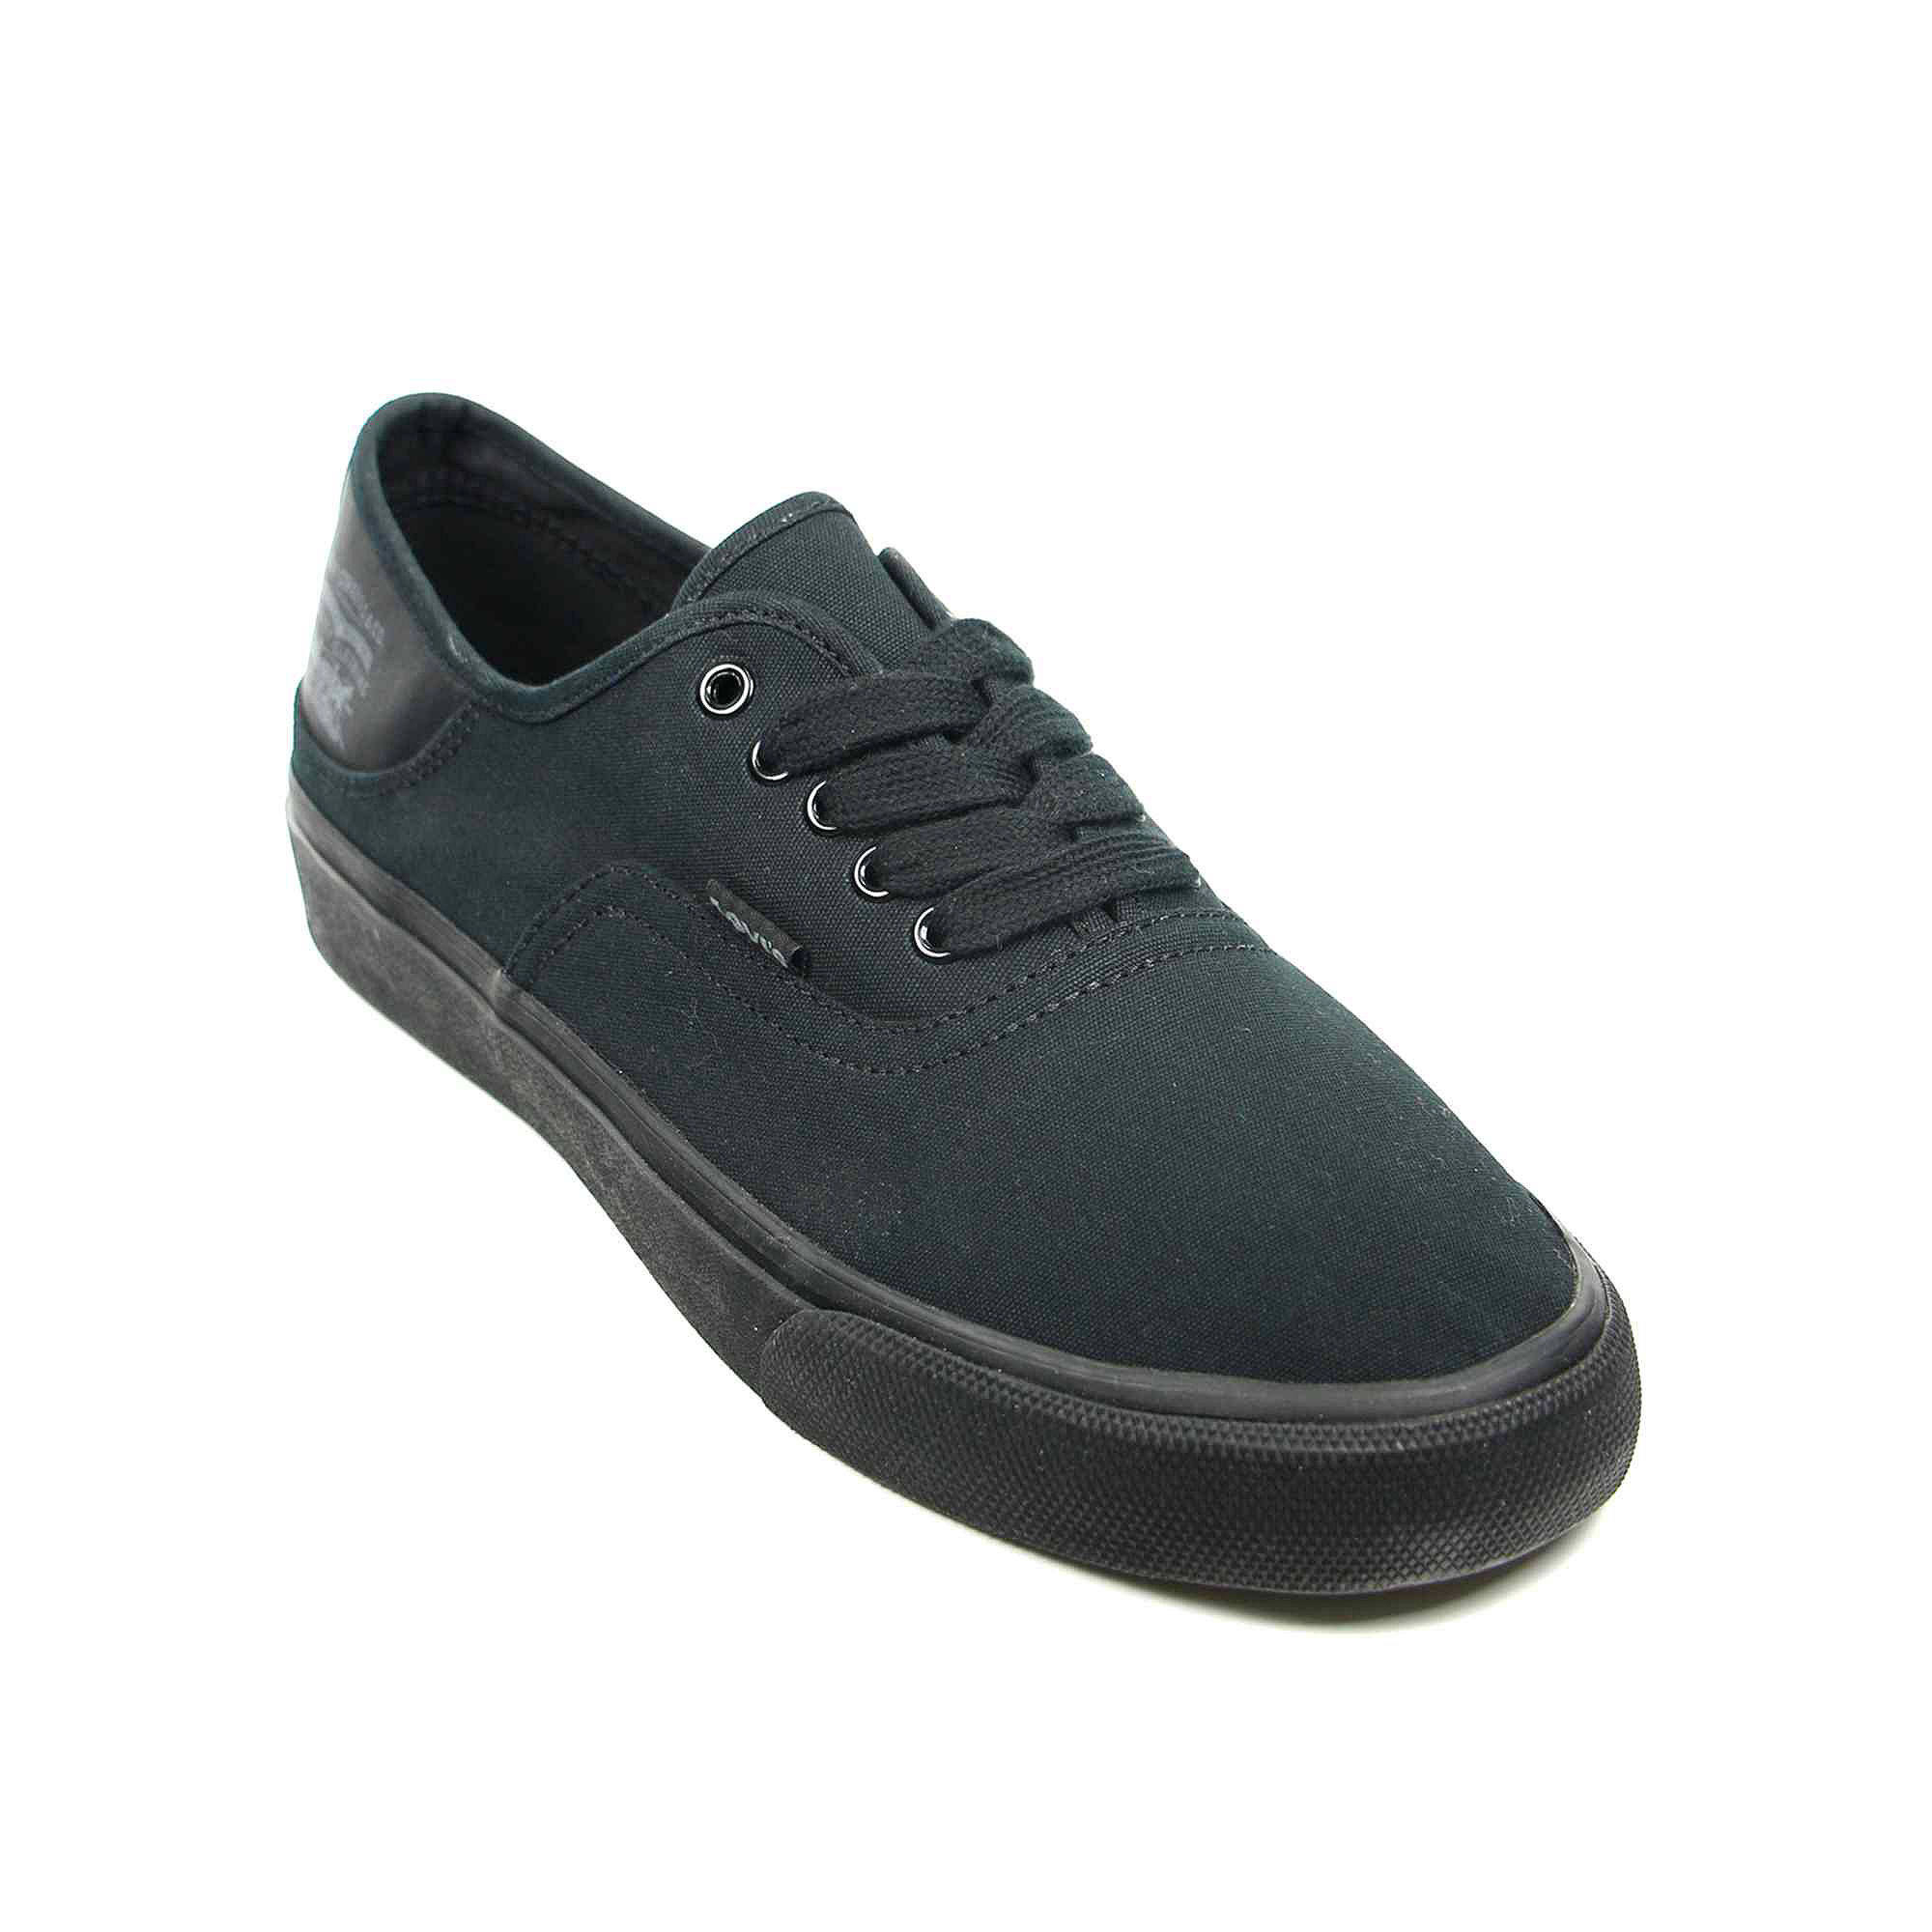 UPC 887326867933 product image for Levis Jordy Buck Mens Sneakers | upcitemdb.com